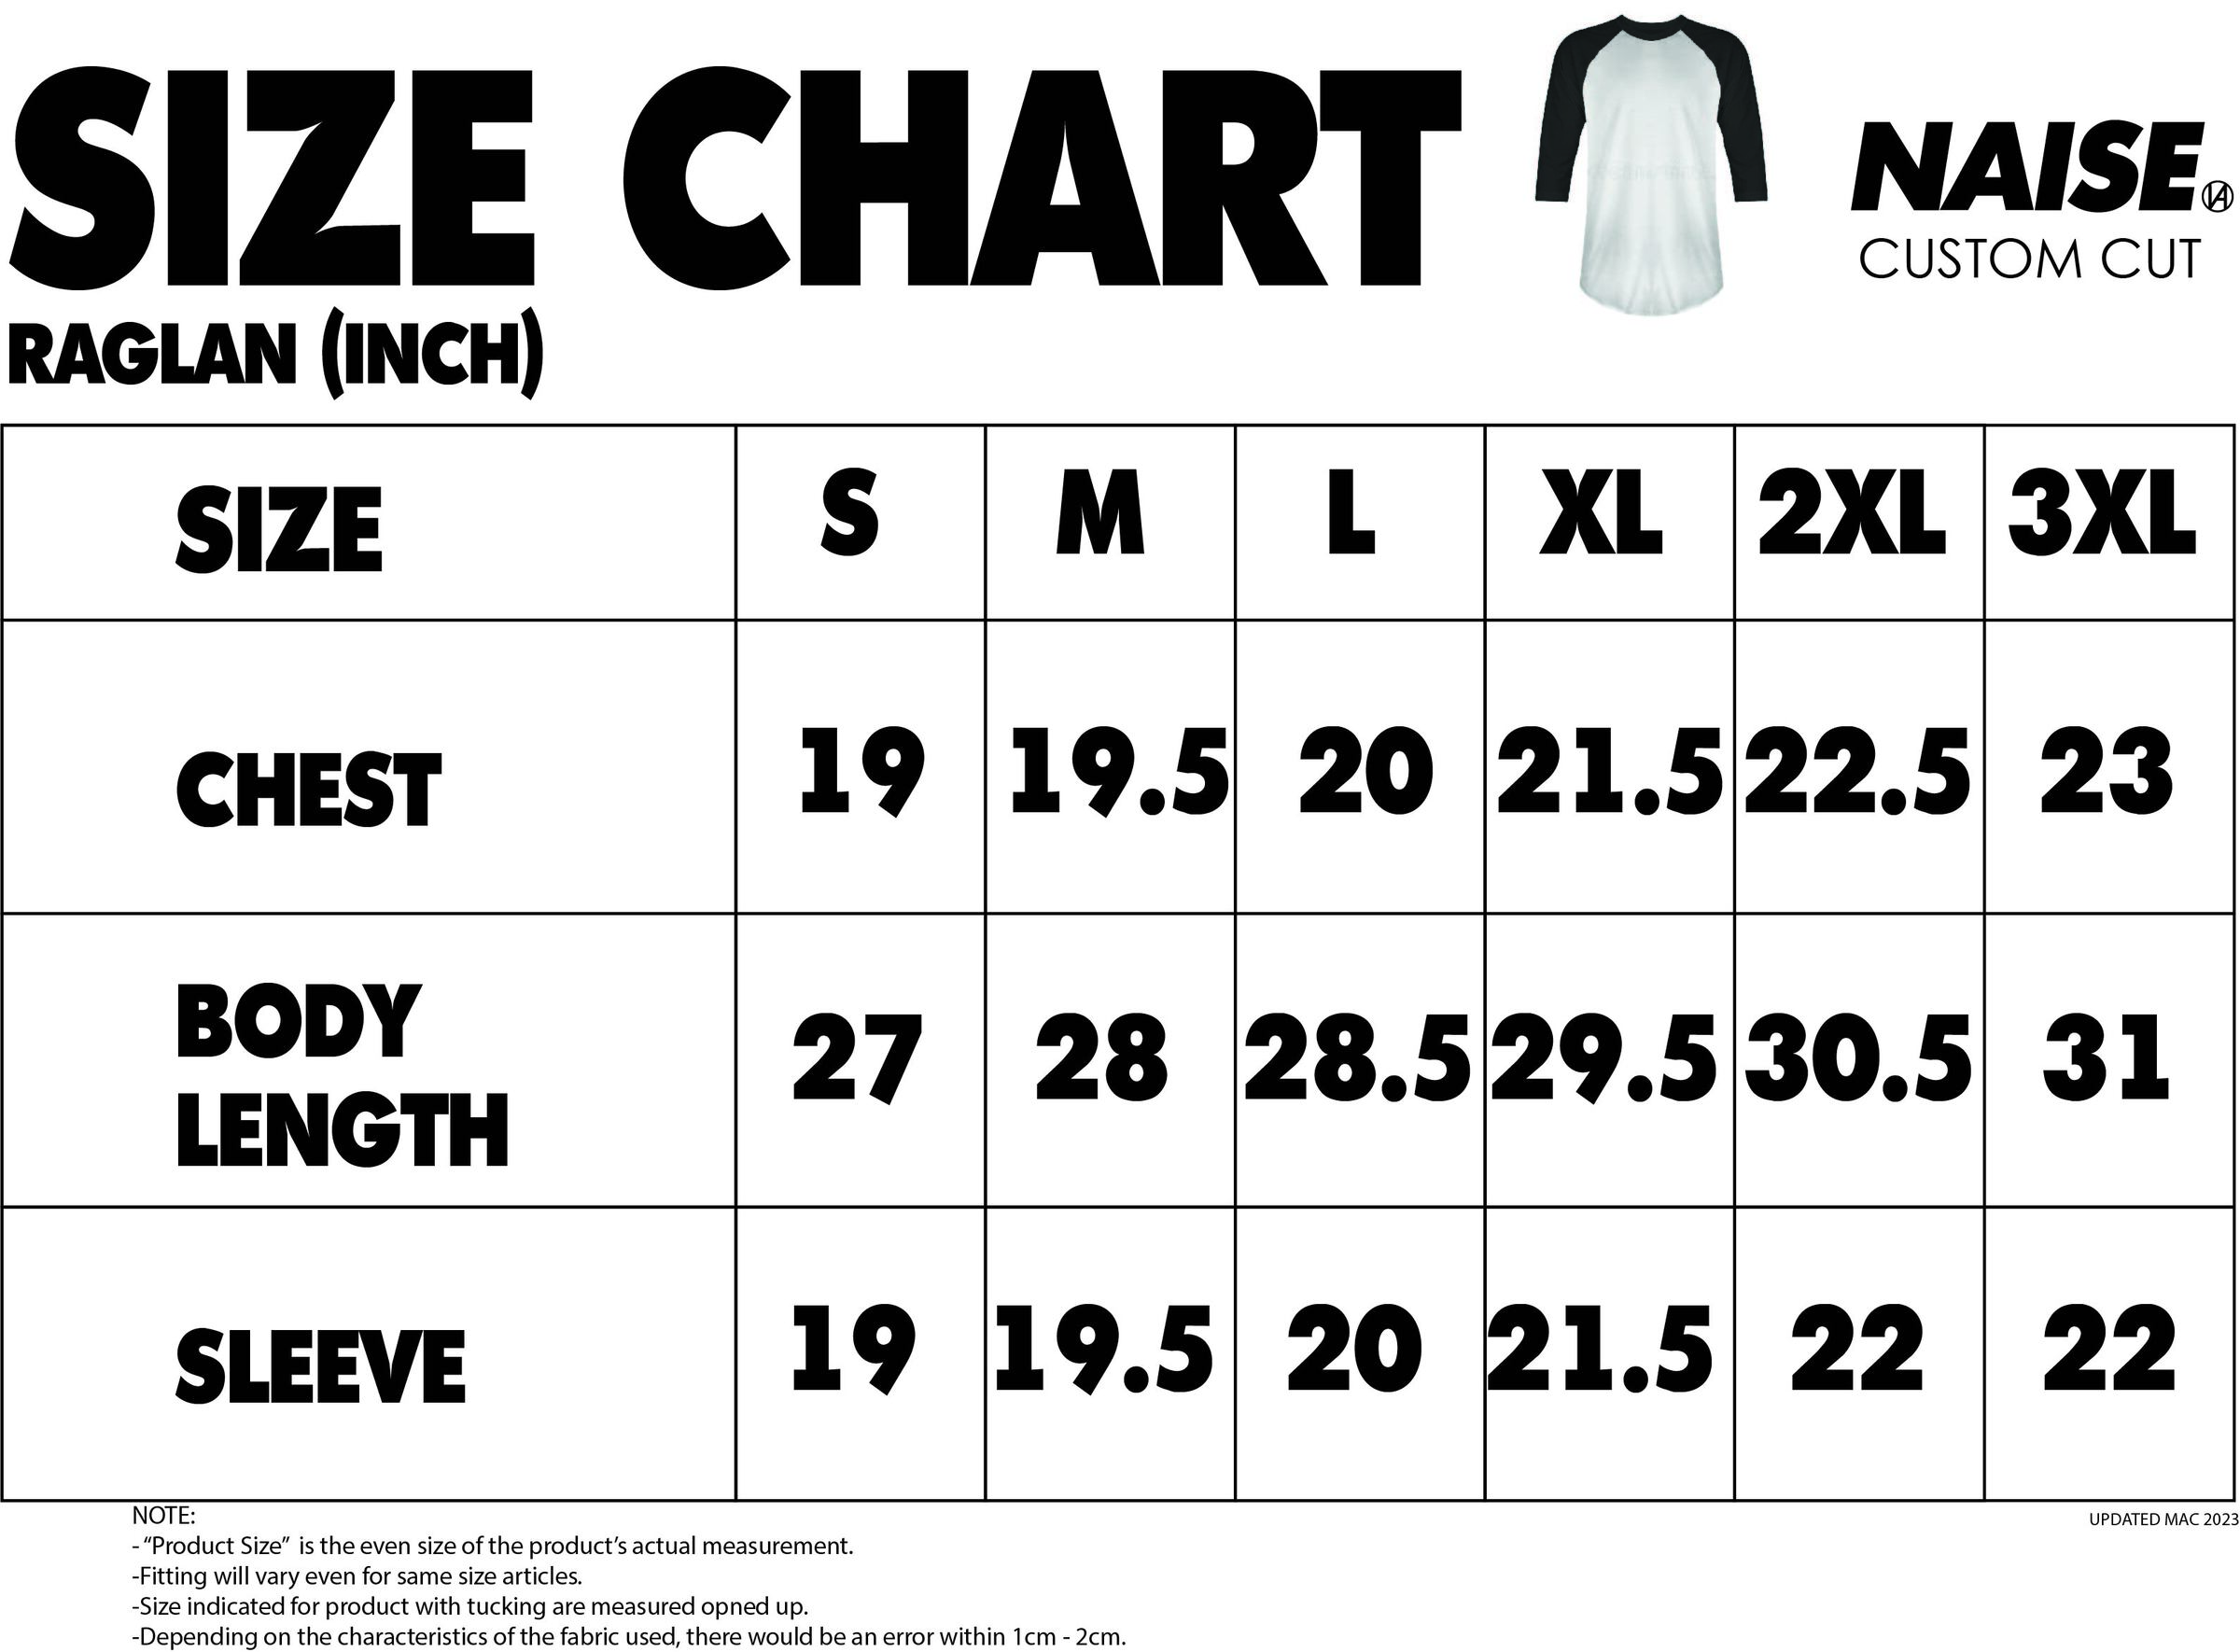 SIZE CHART RAGLAN 2023 MUQRIE NOTE INCLUDED